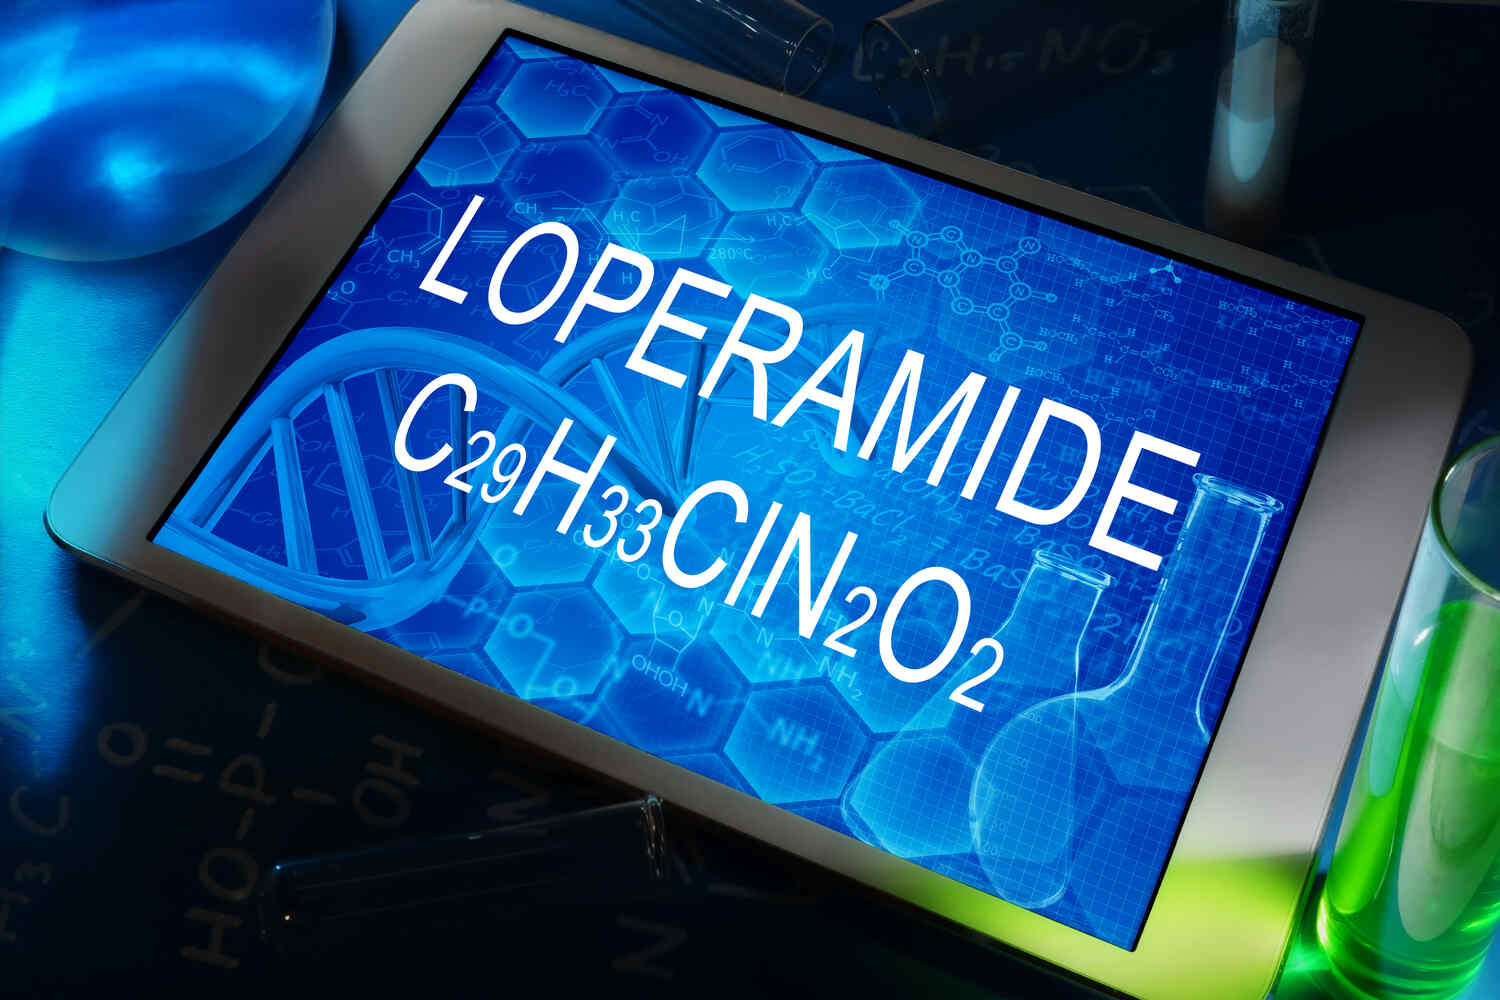 Loperamide Ingredients, Their Action, and Dosage